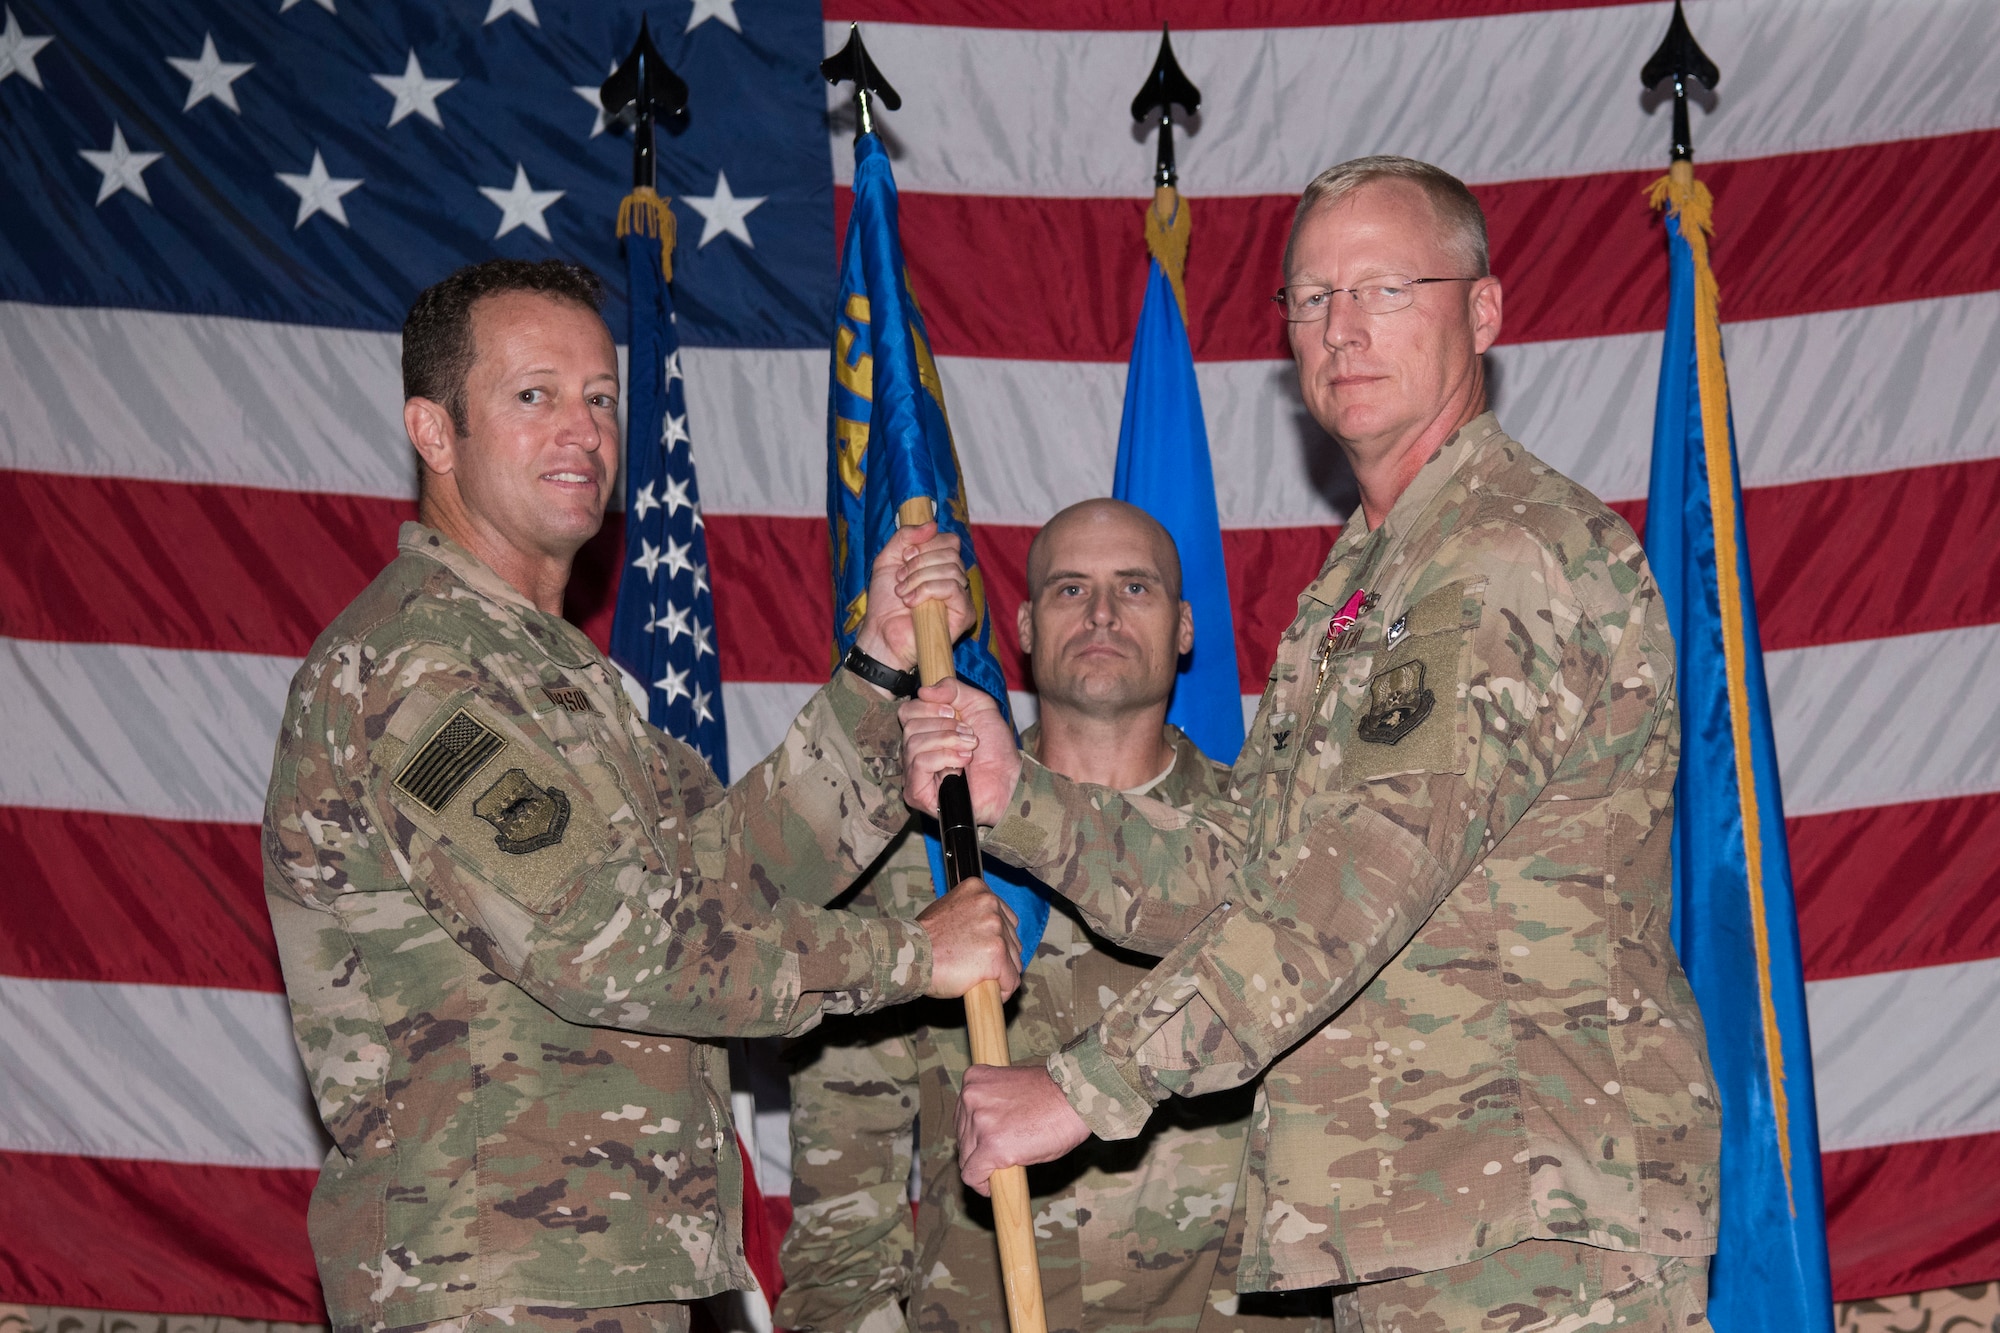 Brig. Gen. David Iverson, 332nd Air Expeditionary Wing commander and presiding officer, takes the 332nd Expeditionary Medical Group guidon from Col. Bradley Nielsen at a change of command ceremony, Aug. 3, 2018, at an undisclosed location in Southwest Asia.